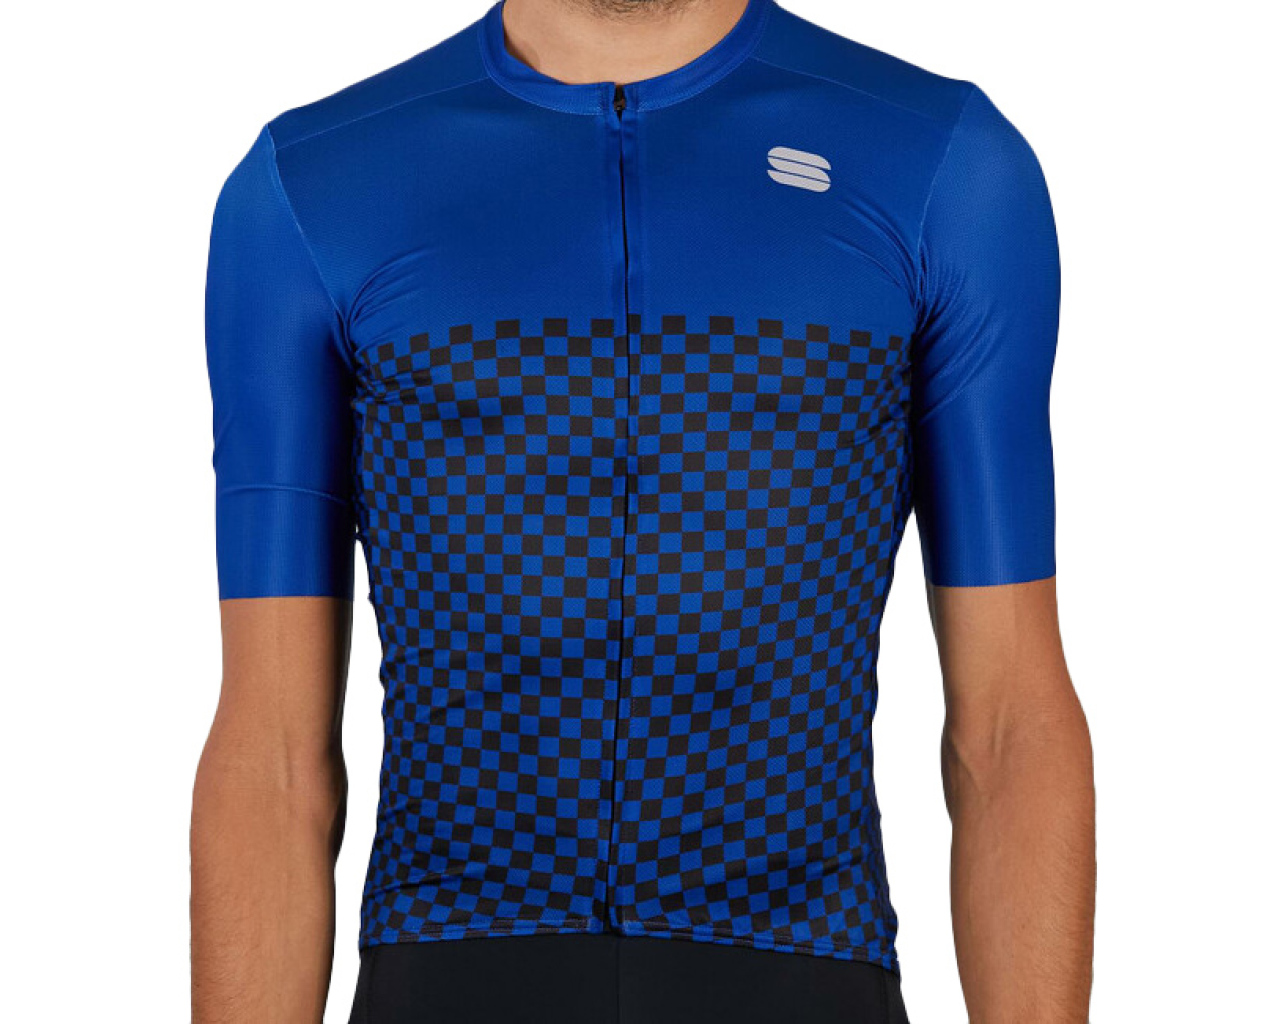 Sportful Checkmate Short Sleeve Cycling Jersey - SS21 | Merlin Cycles